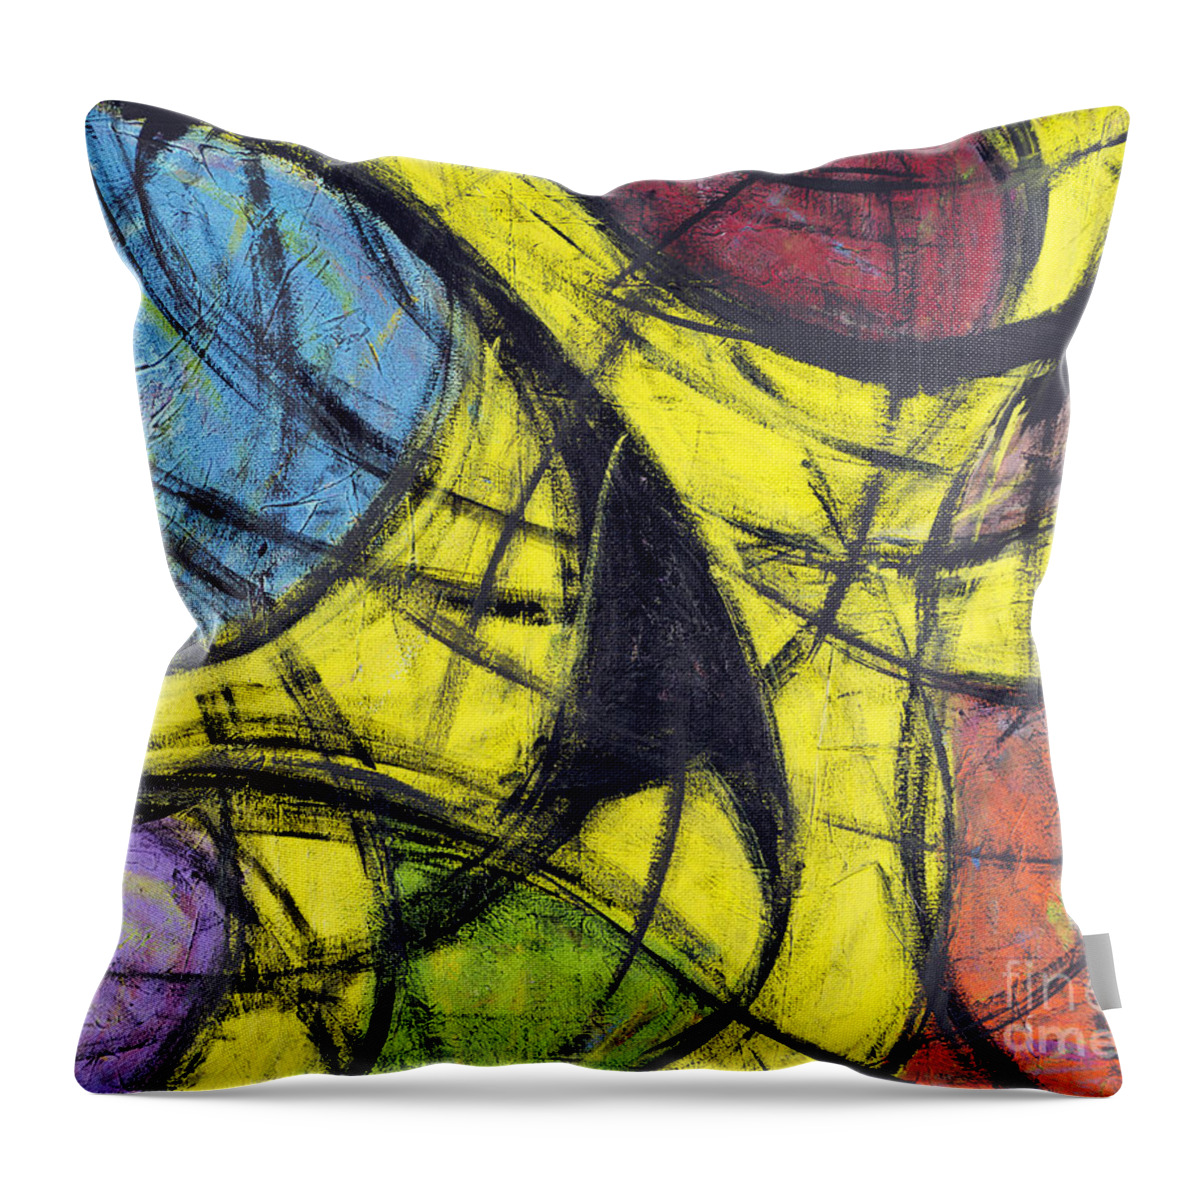 Blue Throw Pillow featuring the painting Jewell Tones by Rebecca Weeks